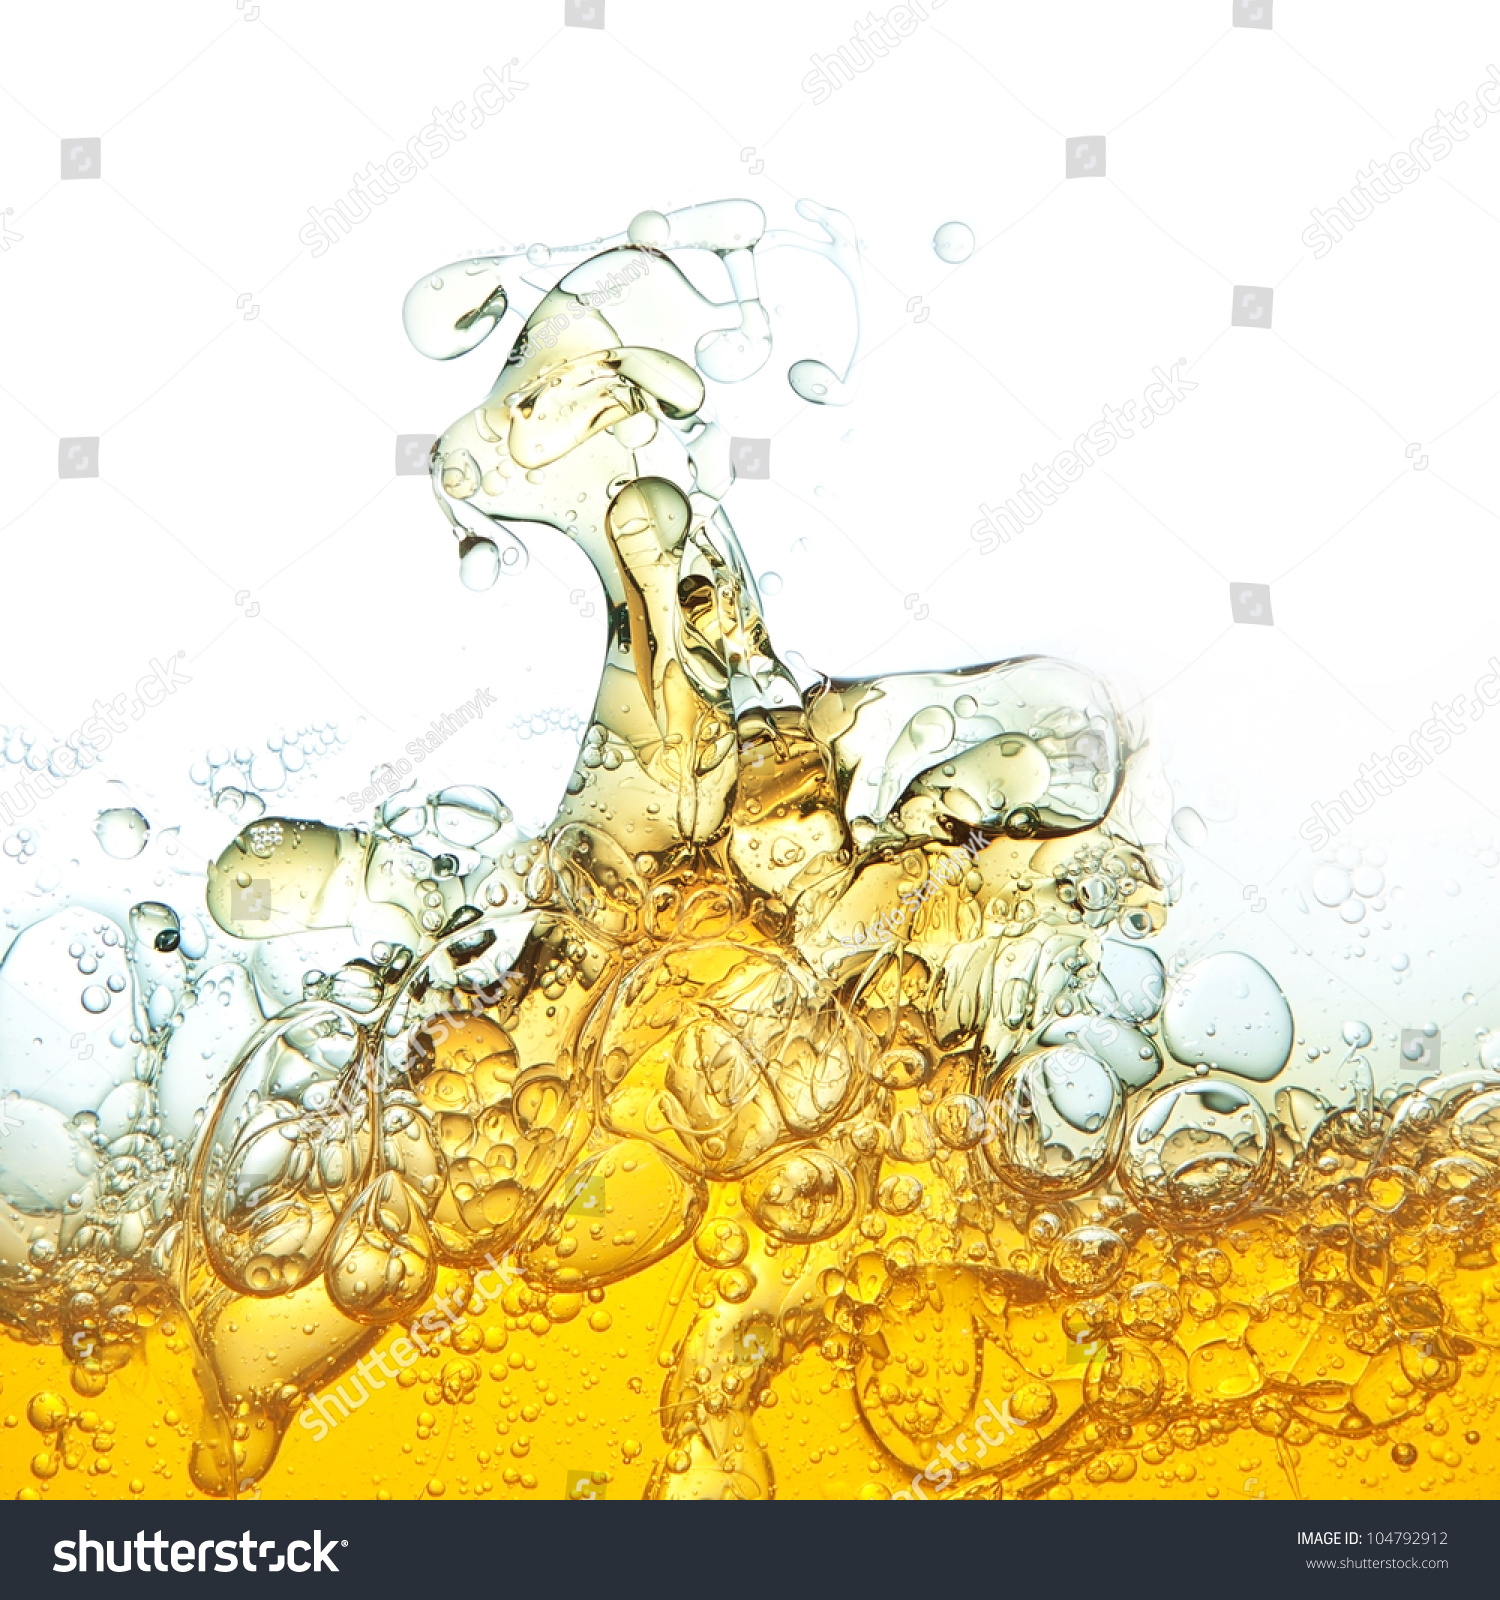 Abstraction Oil Bubbles Water Stock Photo (Safe to Use) 104792912 ...